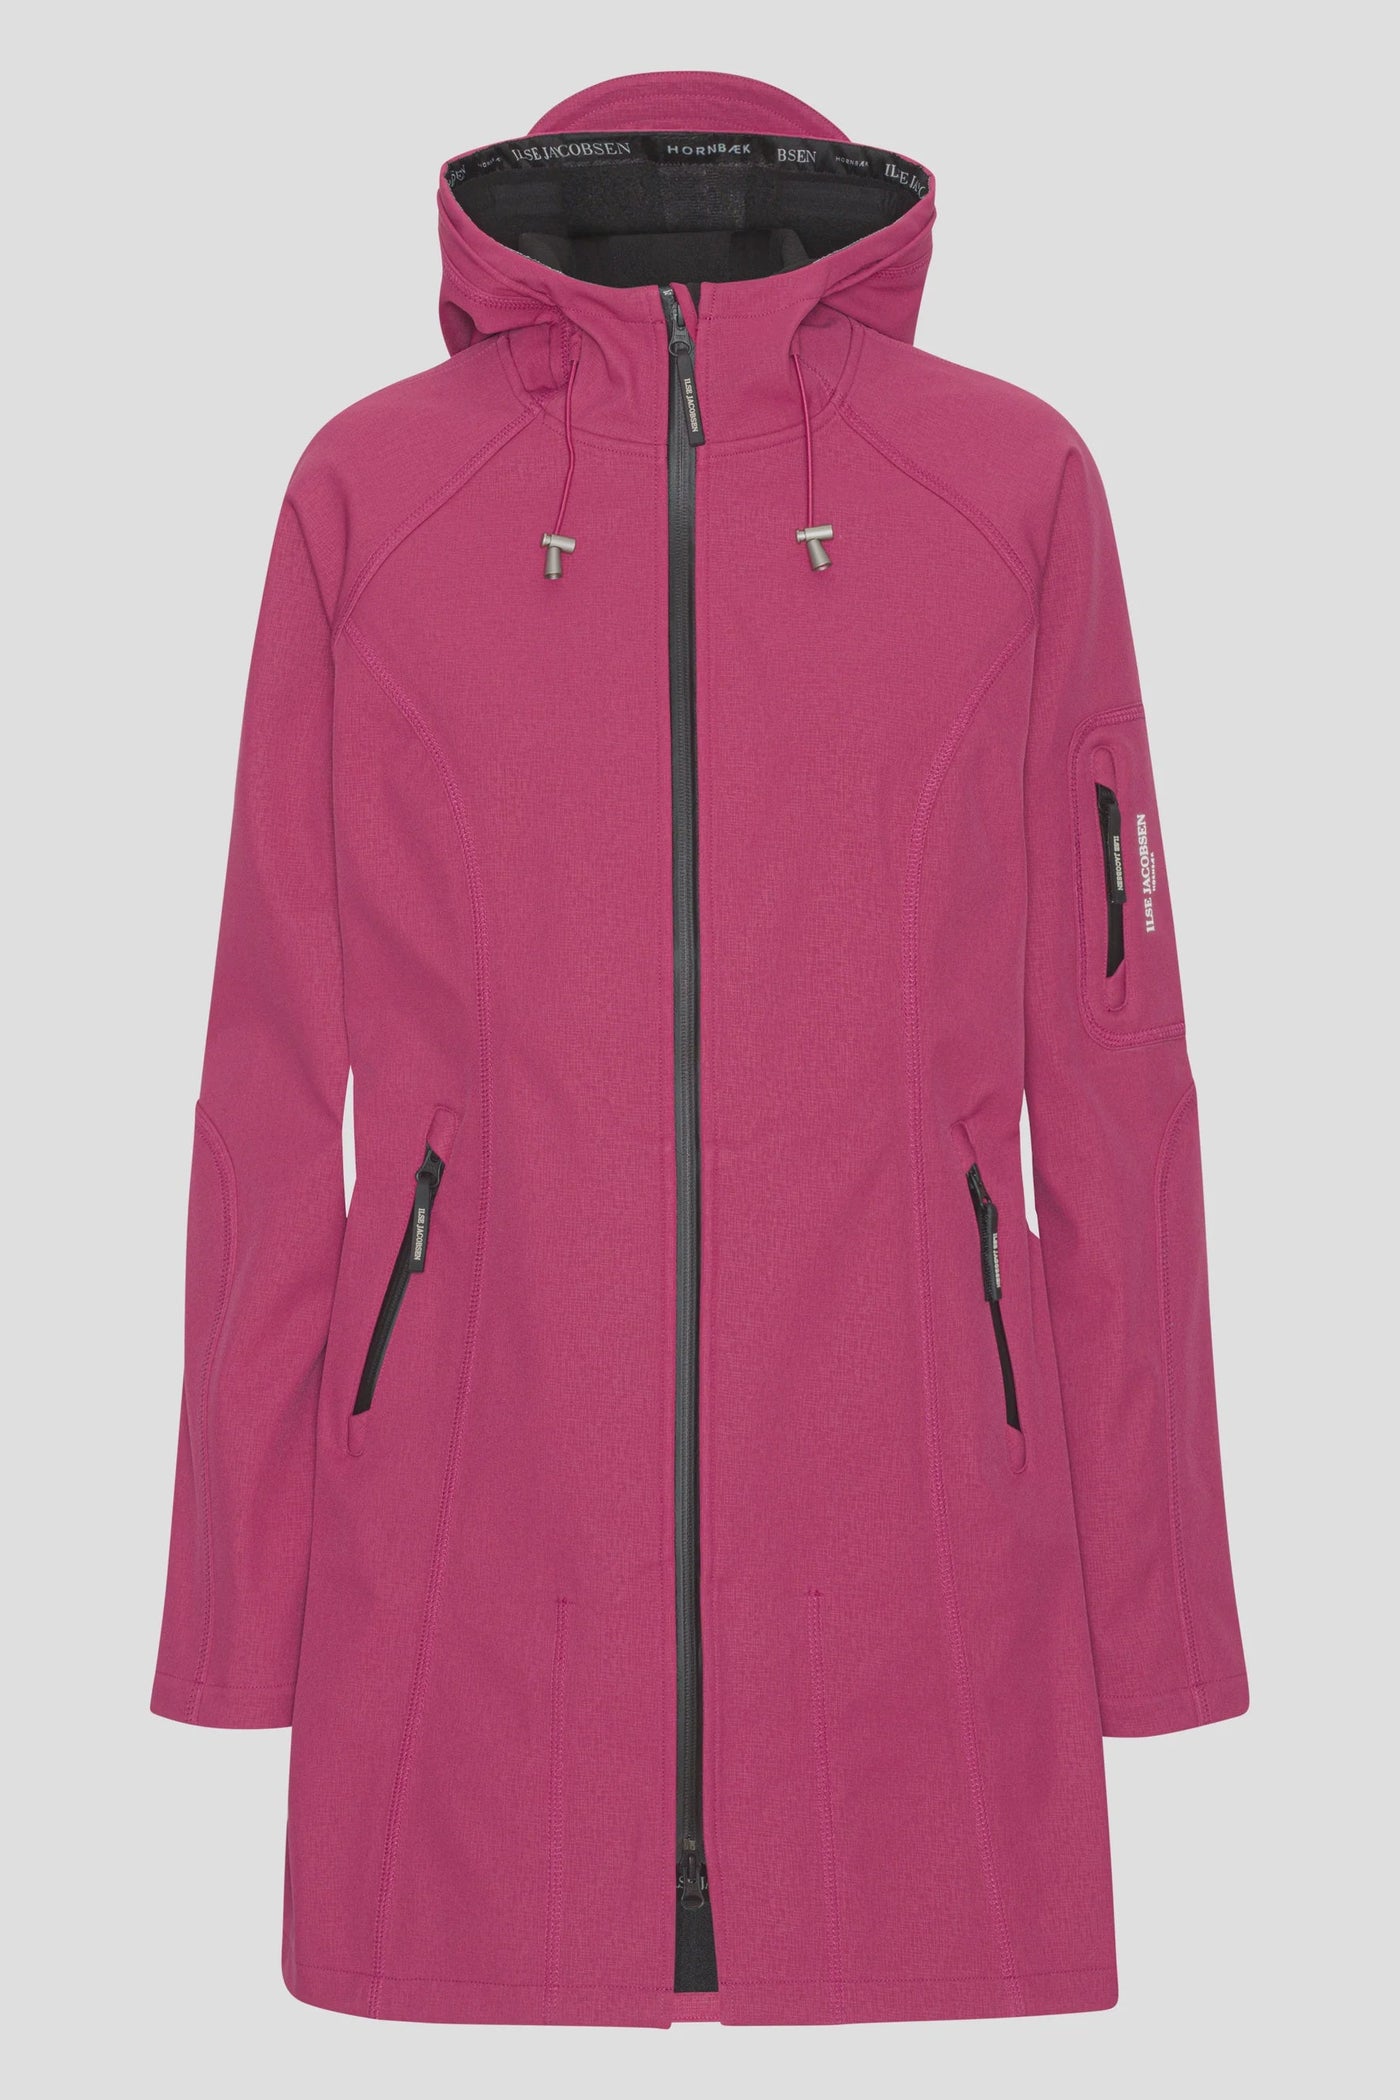 Ilse Jacobsen Rain37 in Sangria-Womens-Ohh! By Gum - Shop Sustainable